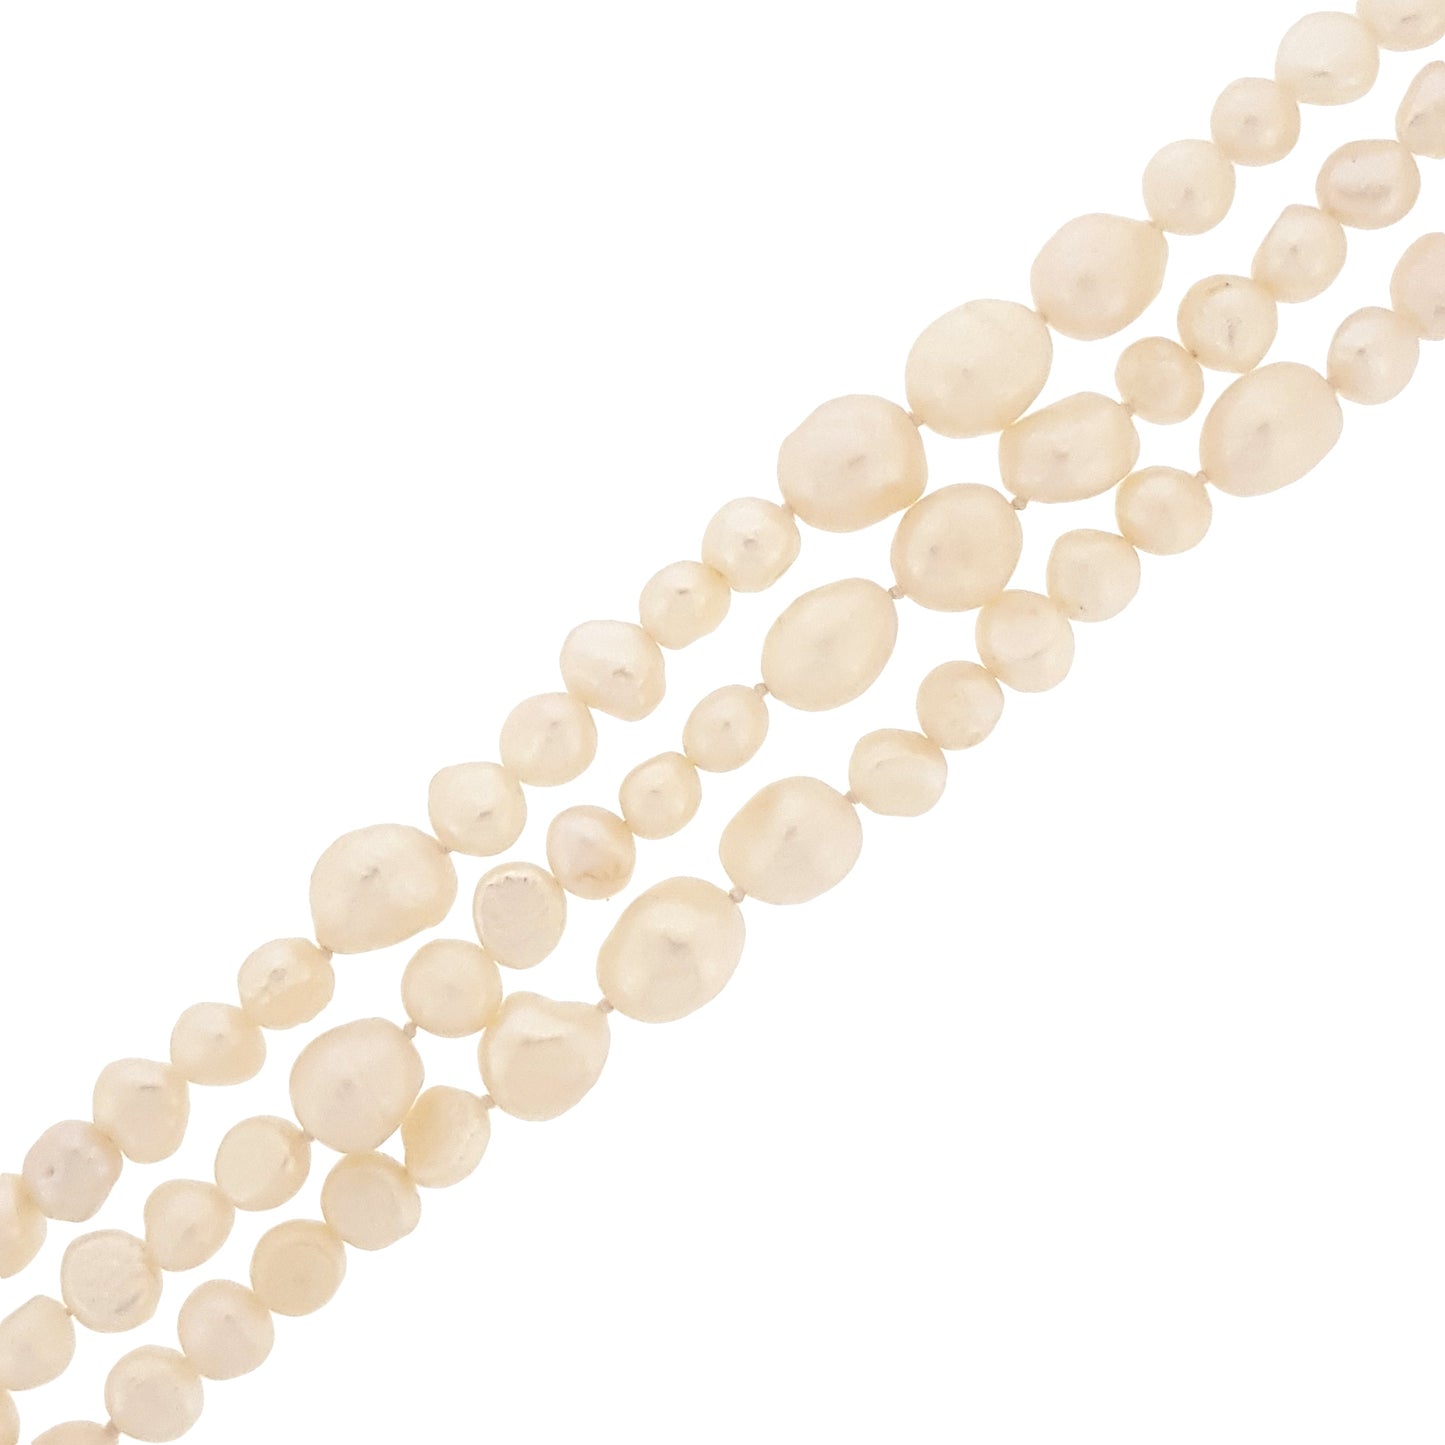 Pearl Necklace 'Longstrand' White Pink Black | The Courthouse Collection